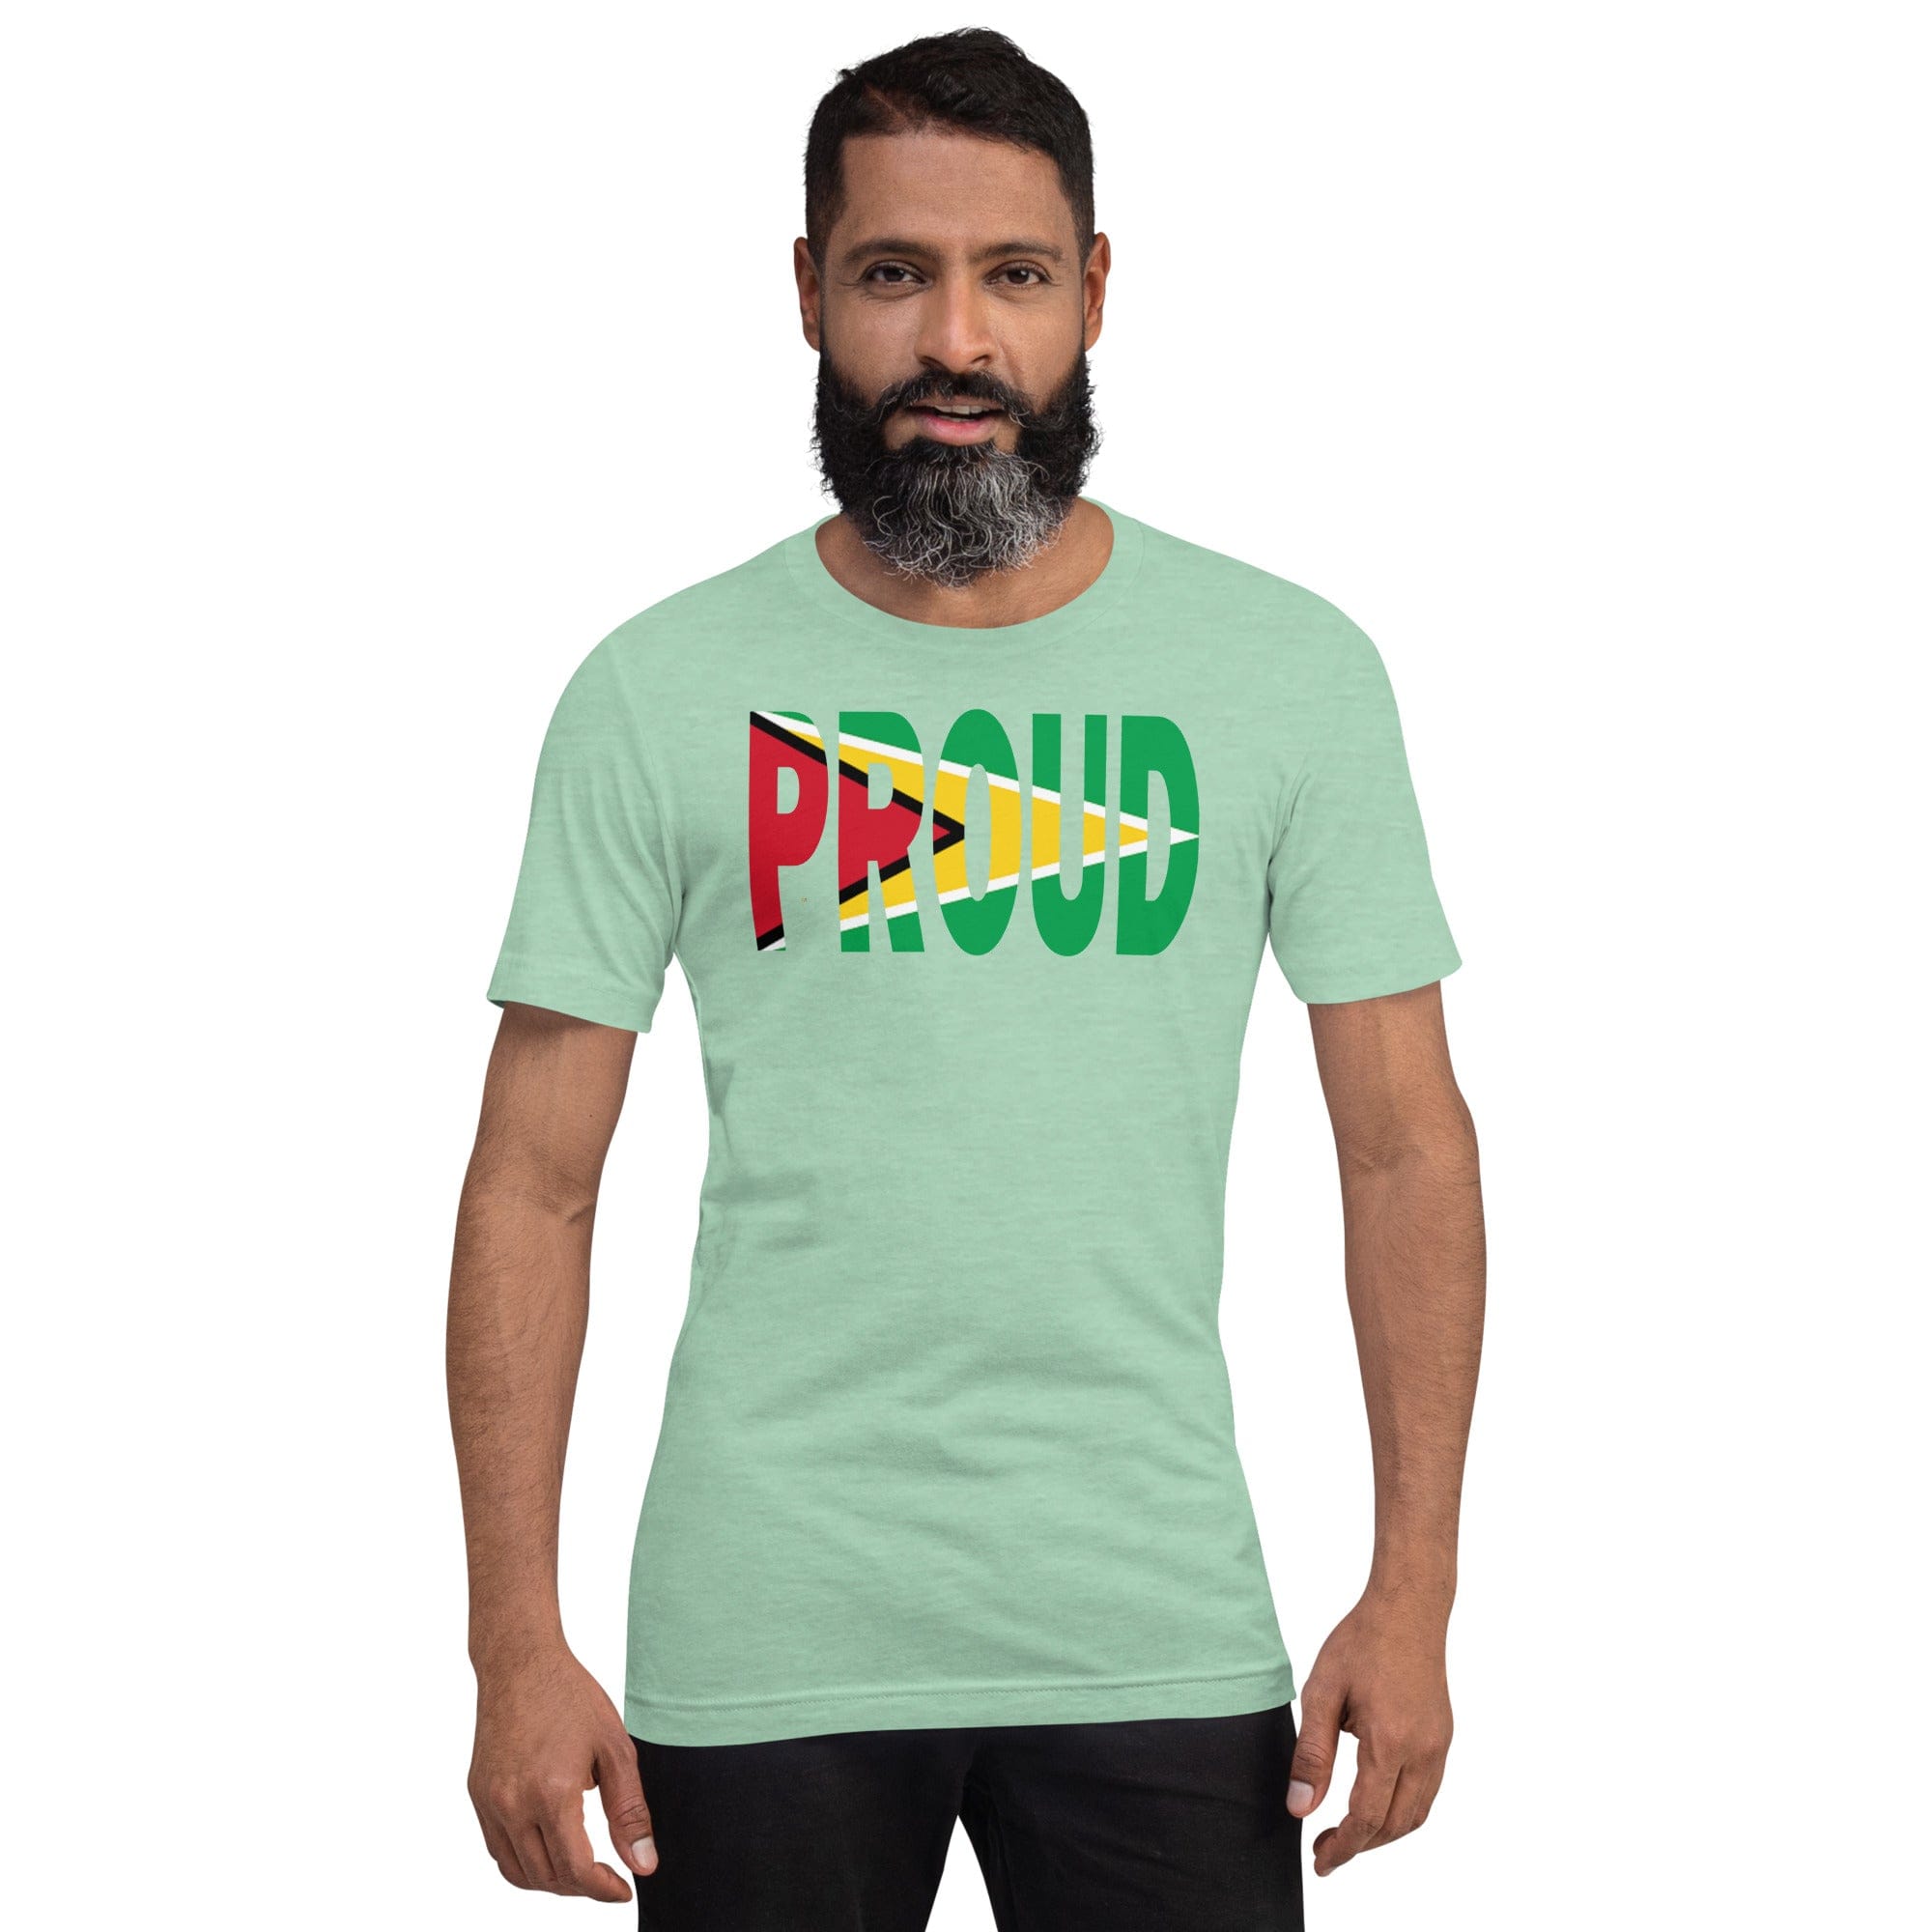 Guyana Flag designed to spell Proud on a green color t-shirt worn by a black man.